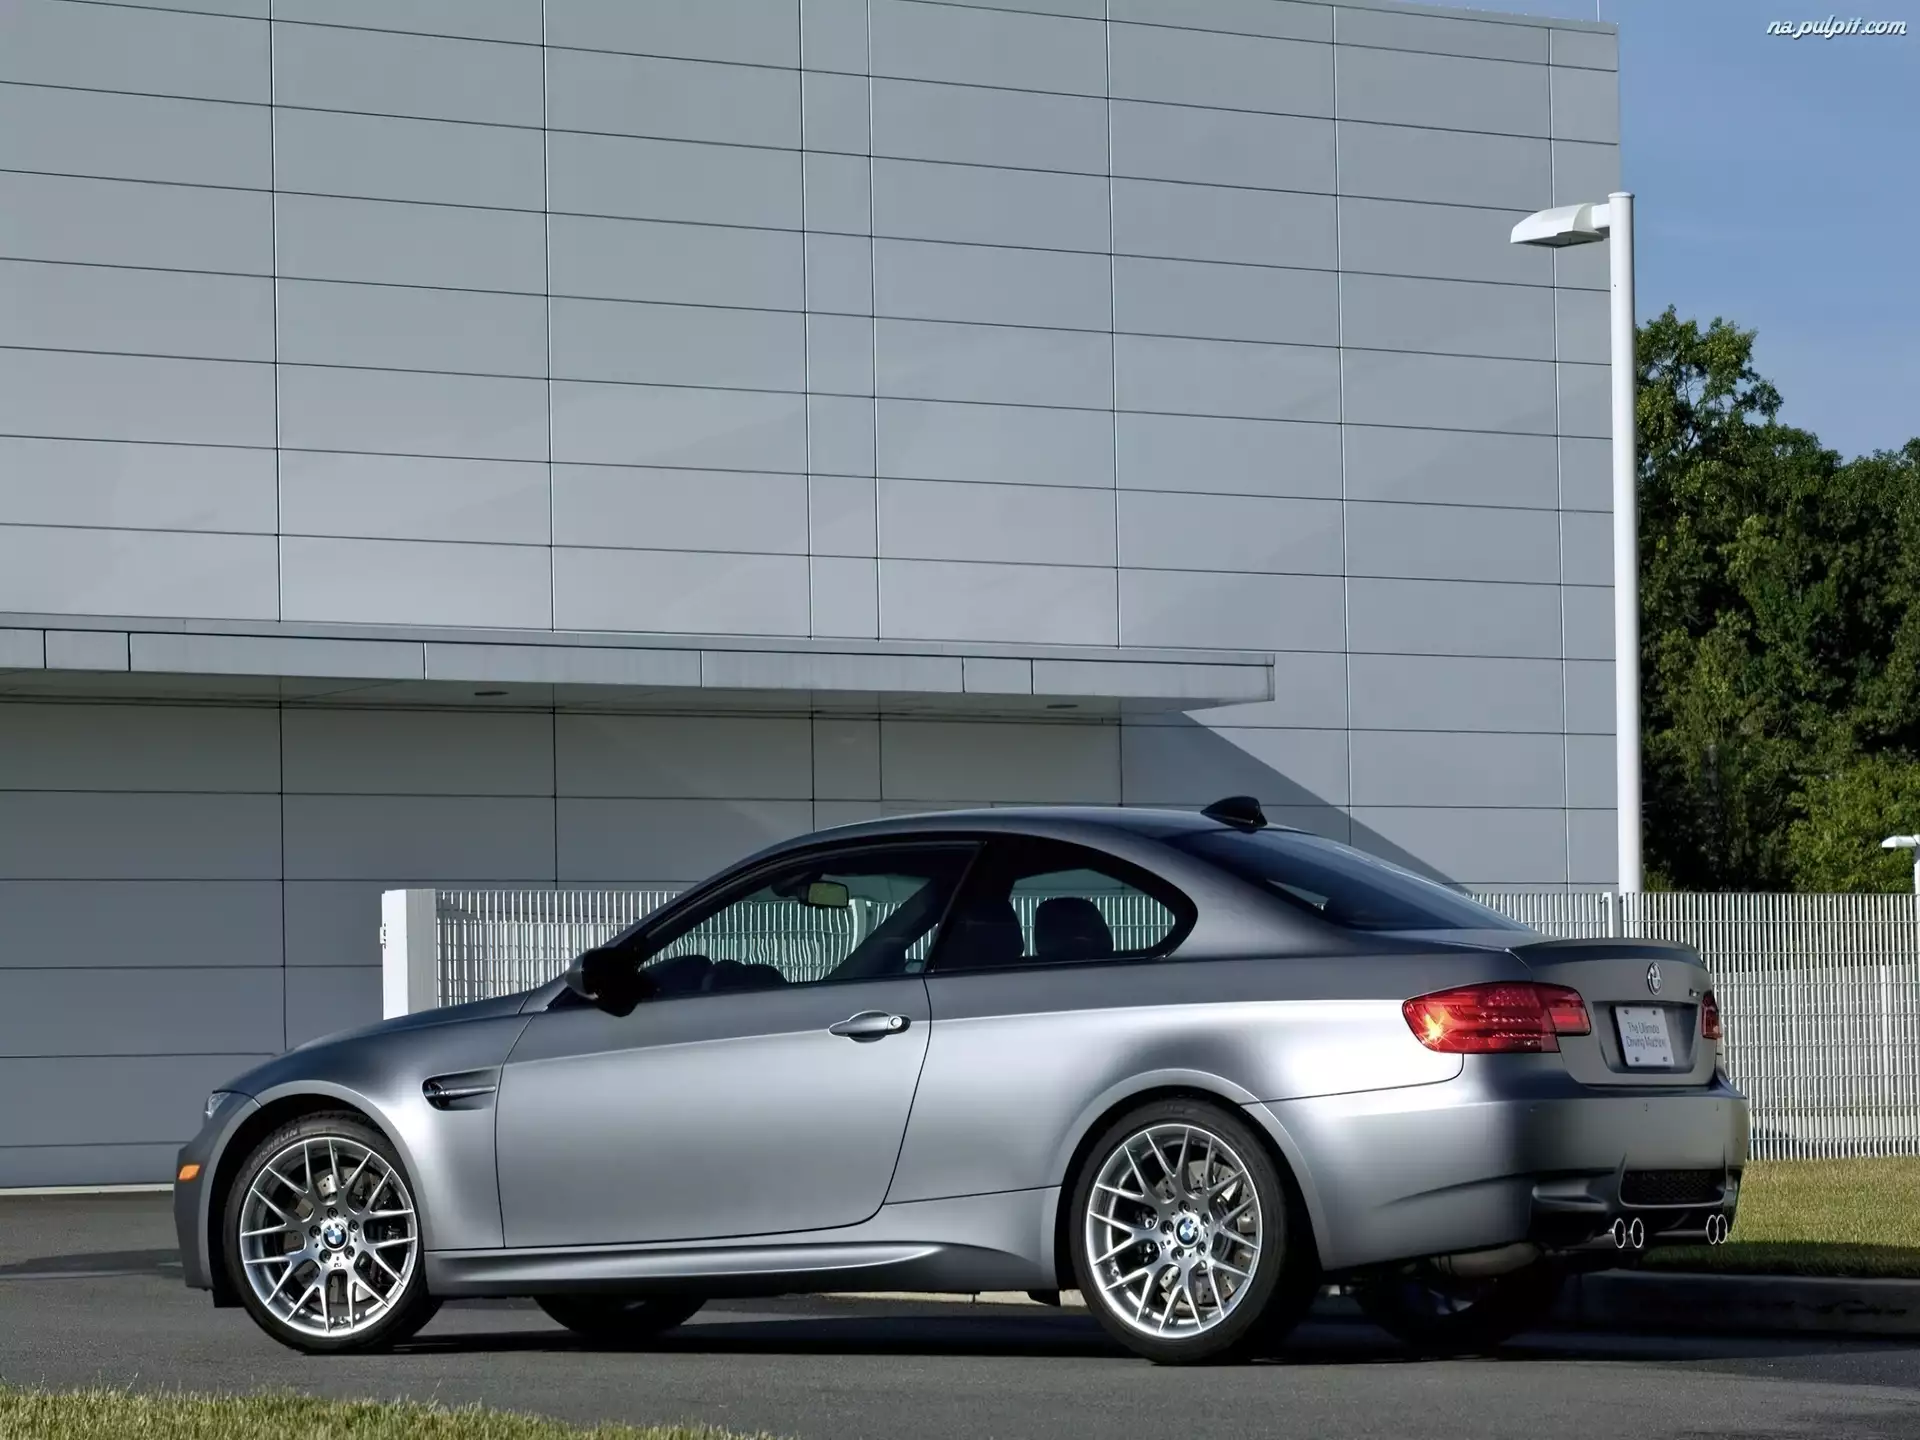 Coupe, BMW M3, Frozen Gray Series